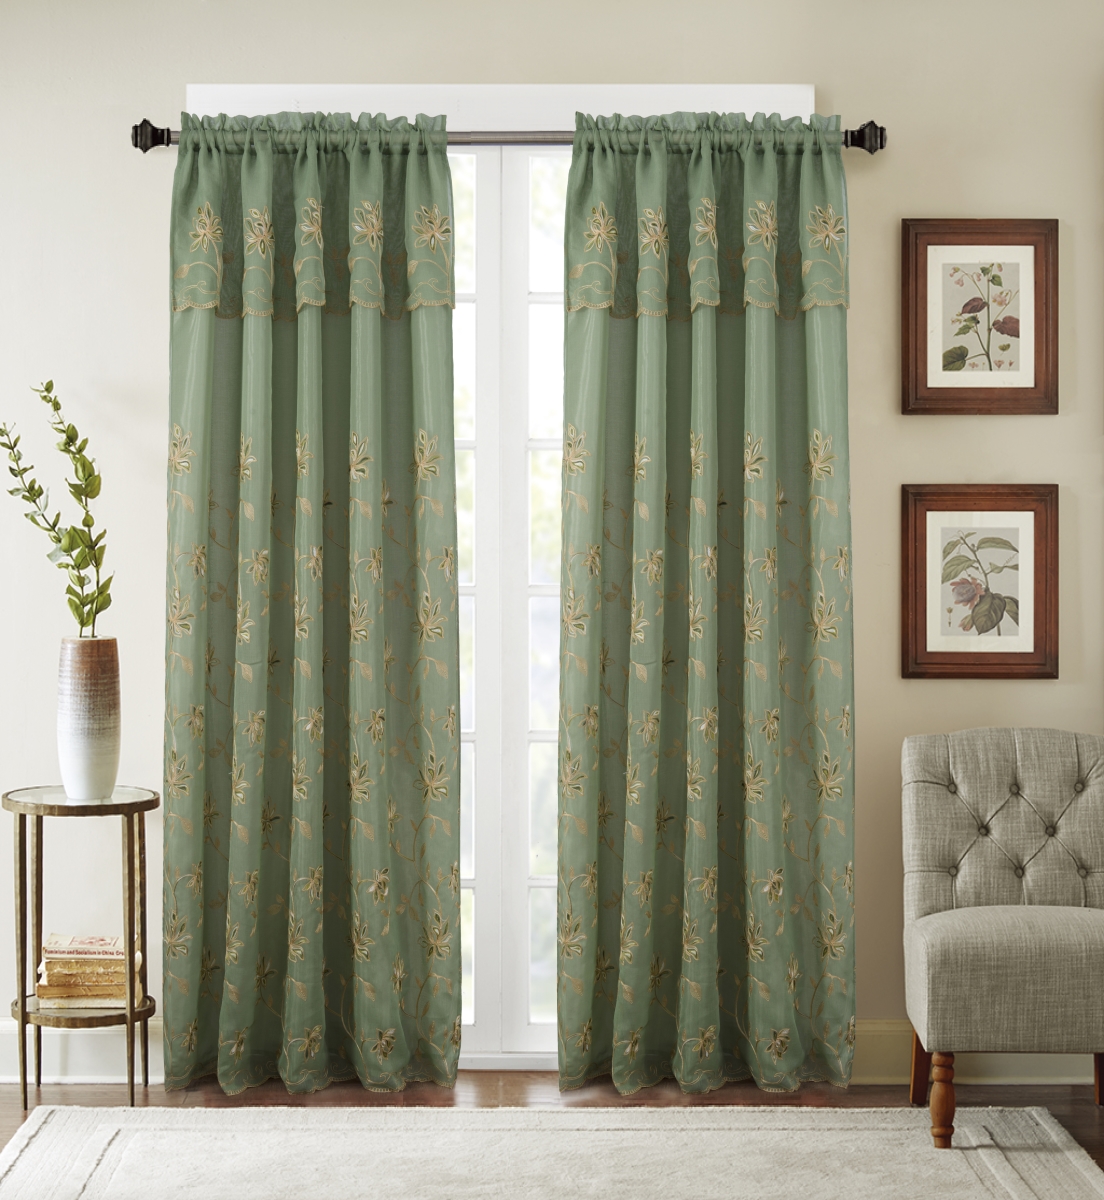 Pnd23682 54 X 84 In. Durant Floral Embroidered Single Rod Pocket Curtain Panel With Attached Valance, Sage